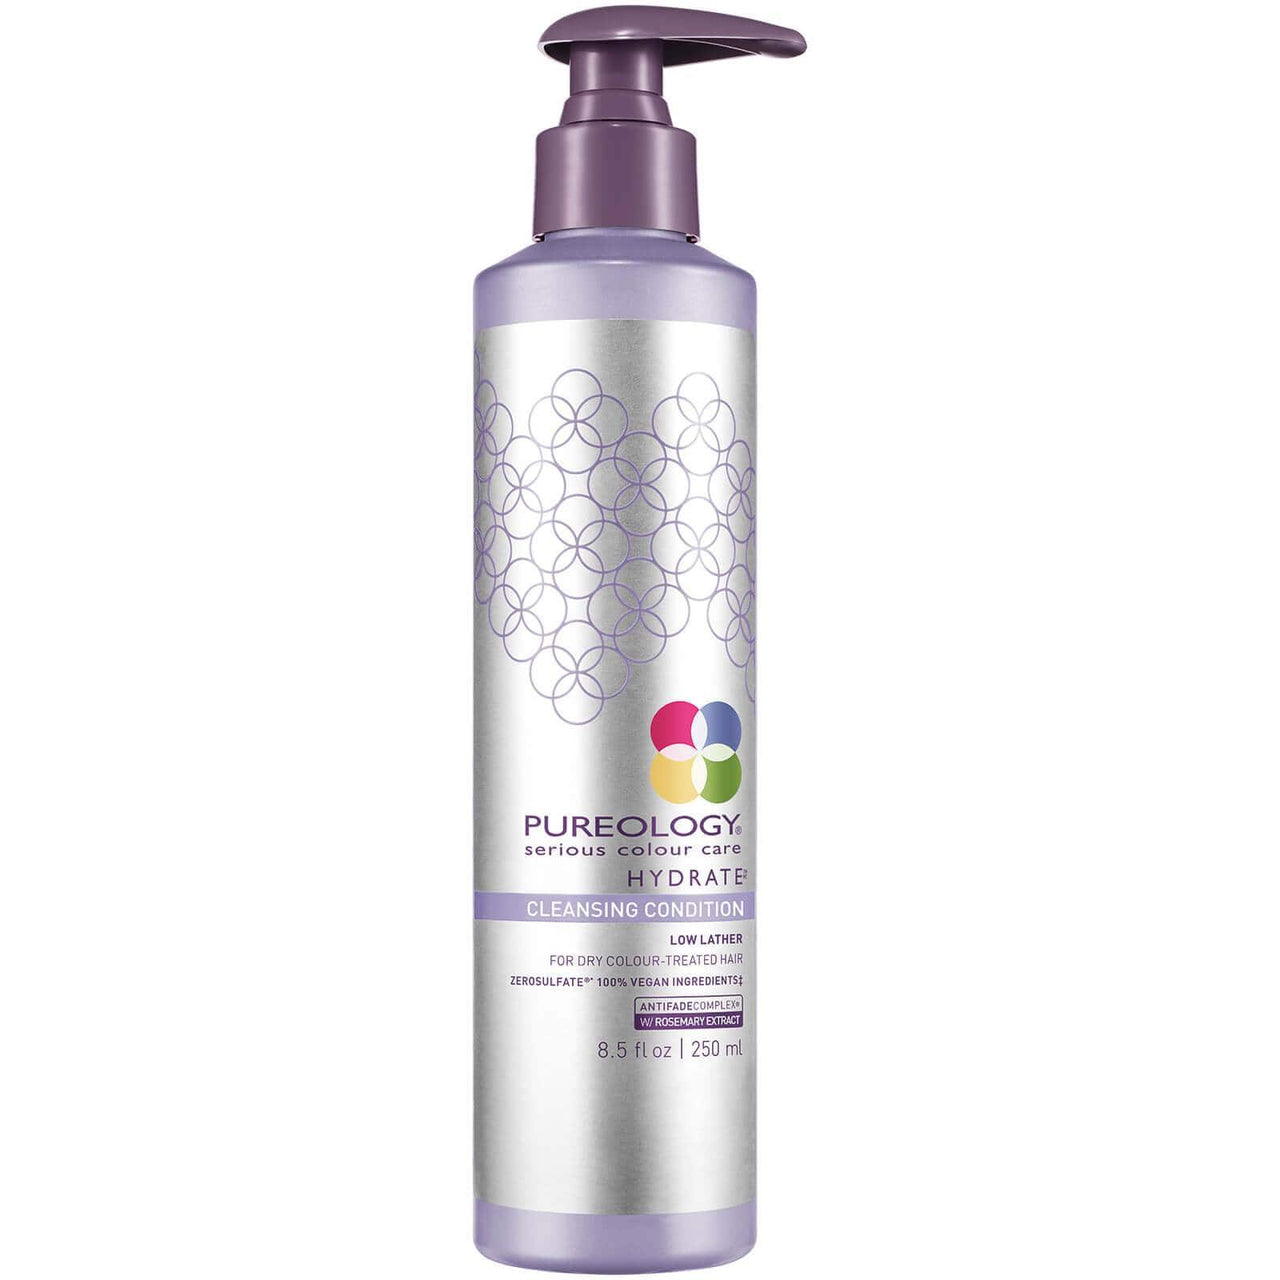 PUREOLOGY_Hydrate Cleansing Condition 250ml / 8.5oz_Cosmetic World